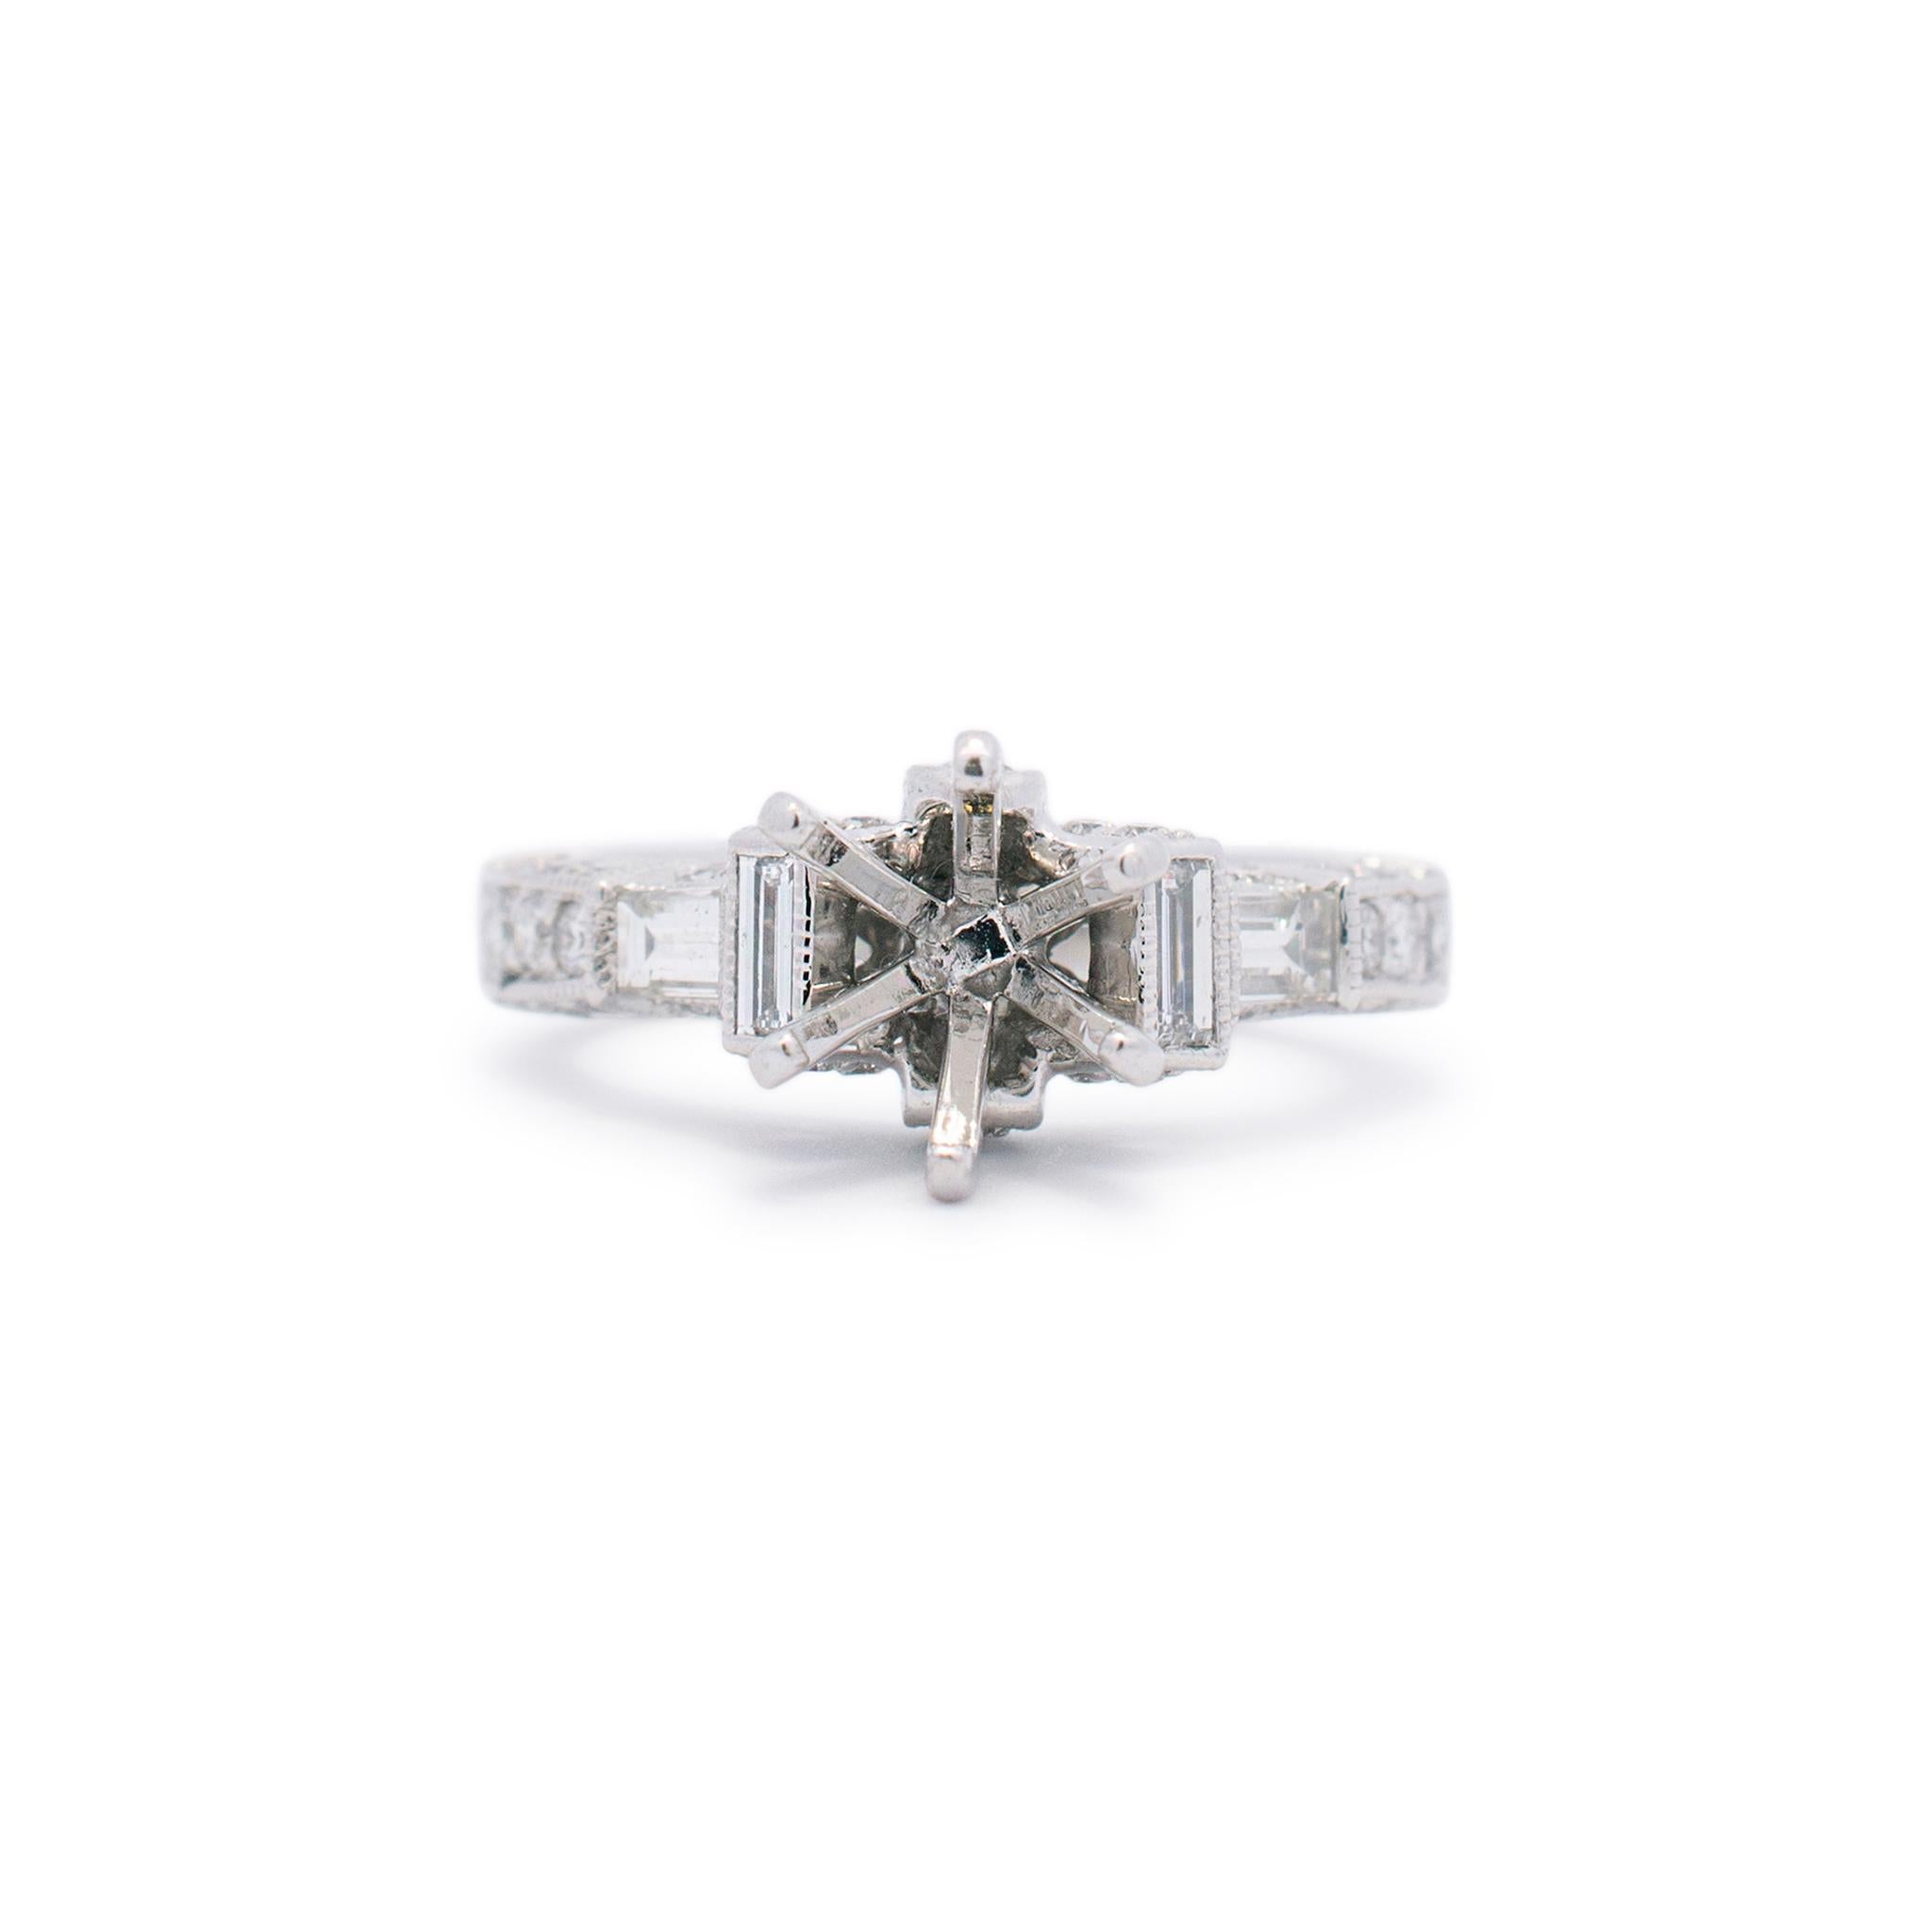 Gender: Ladies

Metal Type: 18K white gold

Size(US): 5

Width: 6.70mm

Total Weight: 6.10 grams

18K white gold diamond semi-mount engagement ring. Was polished and rhodium plated. Has a tapered shank that measures approximately 7.30mm tapering to